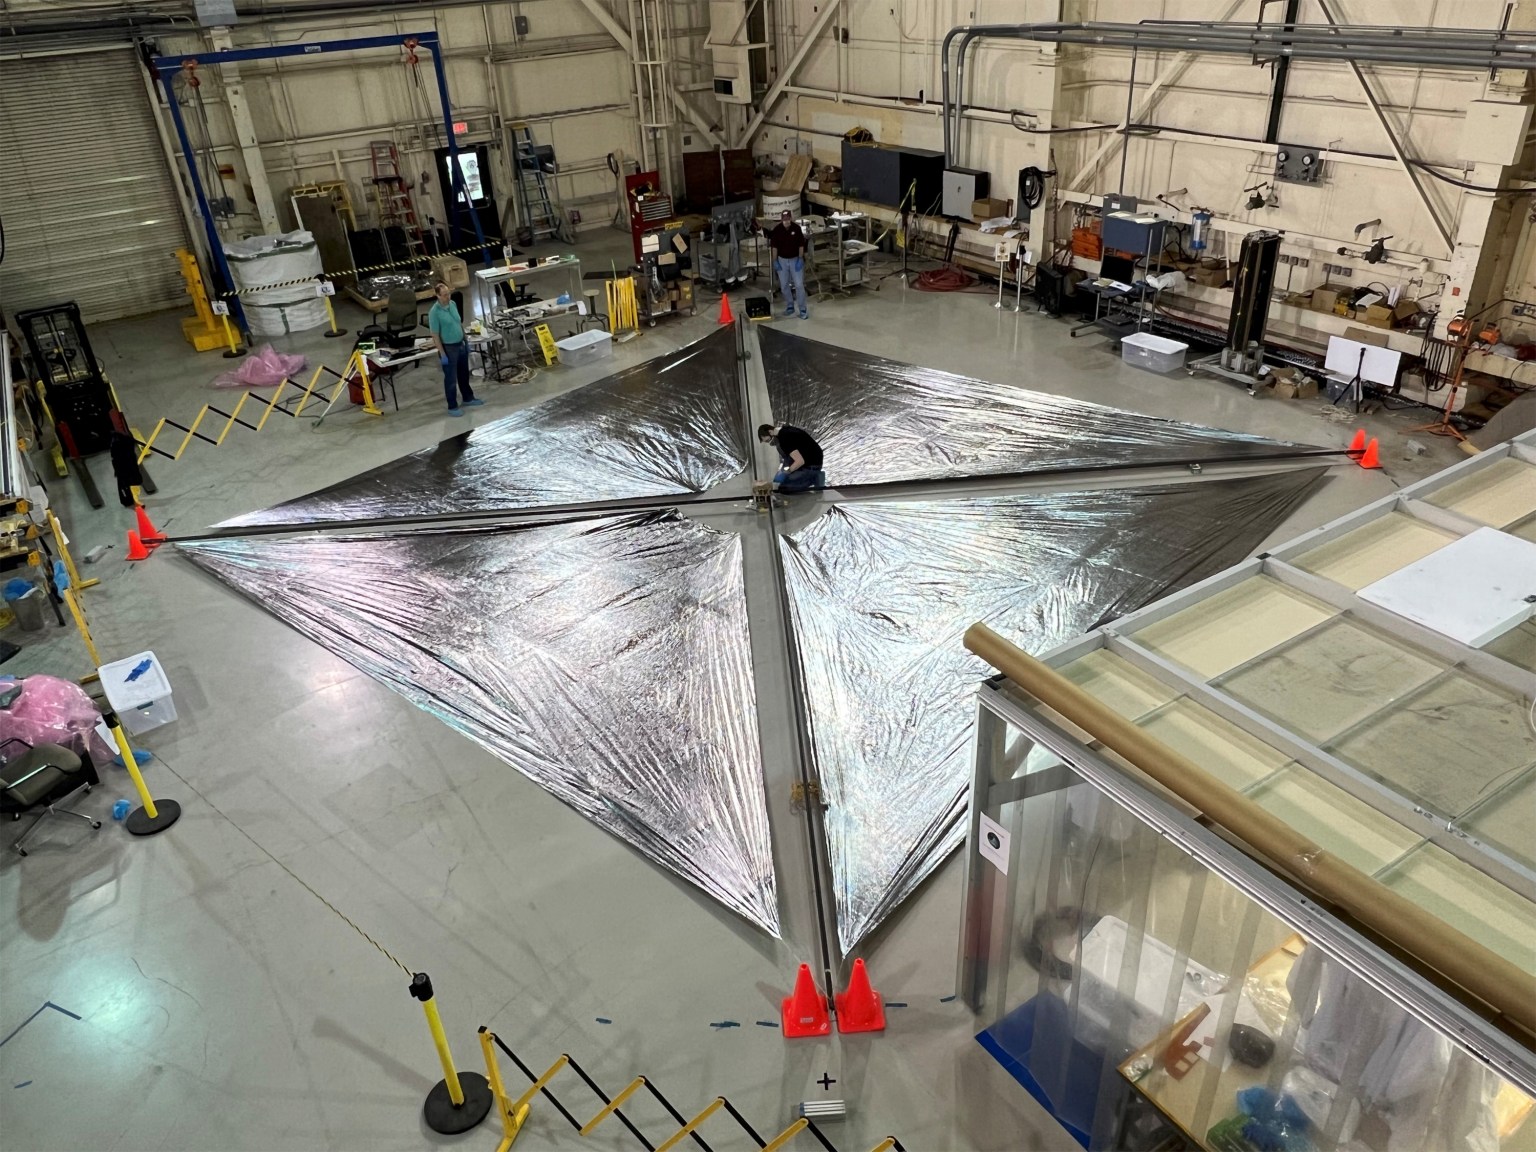 Advanced Composite Solar Sail System’s solar sail is laid out on the floor of a warehouse